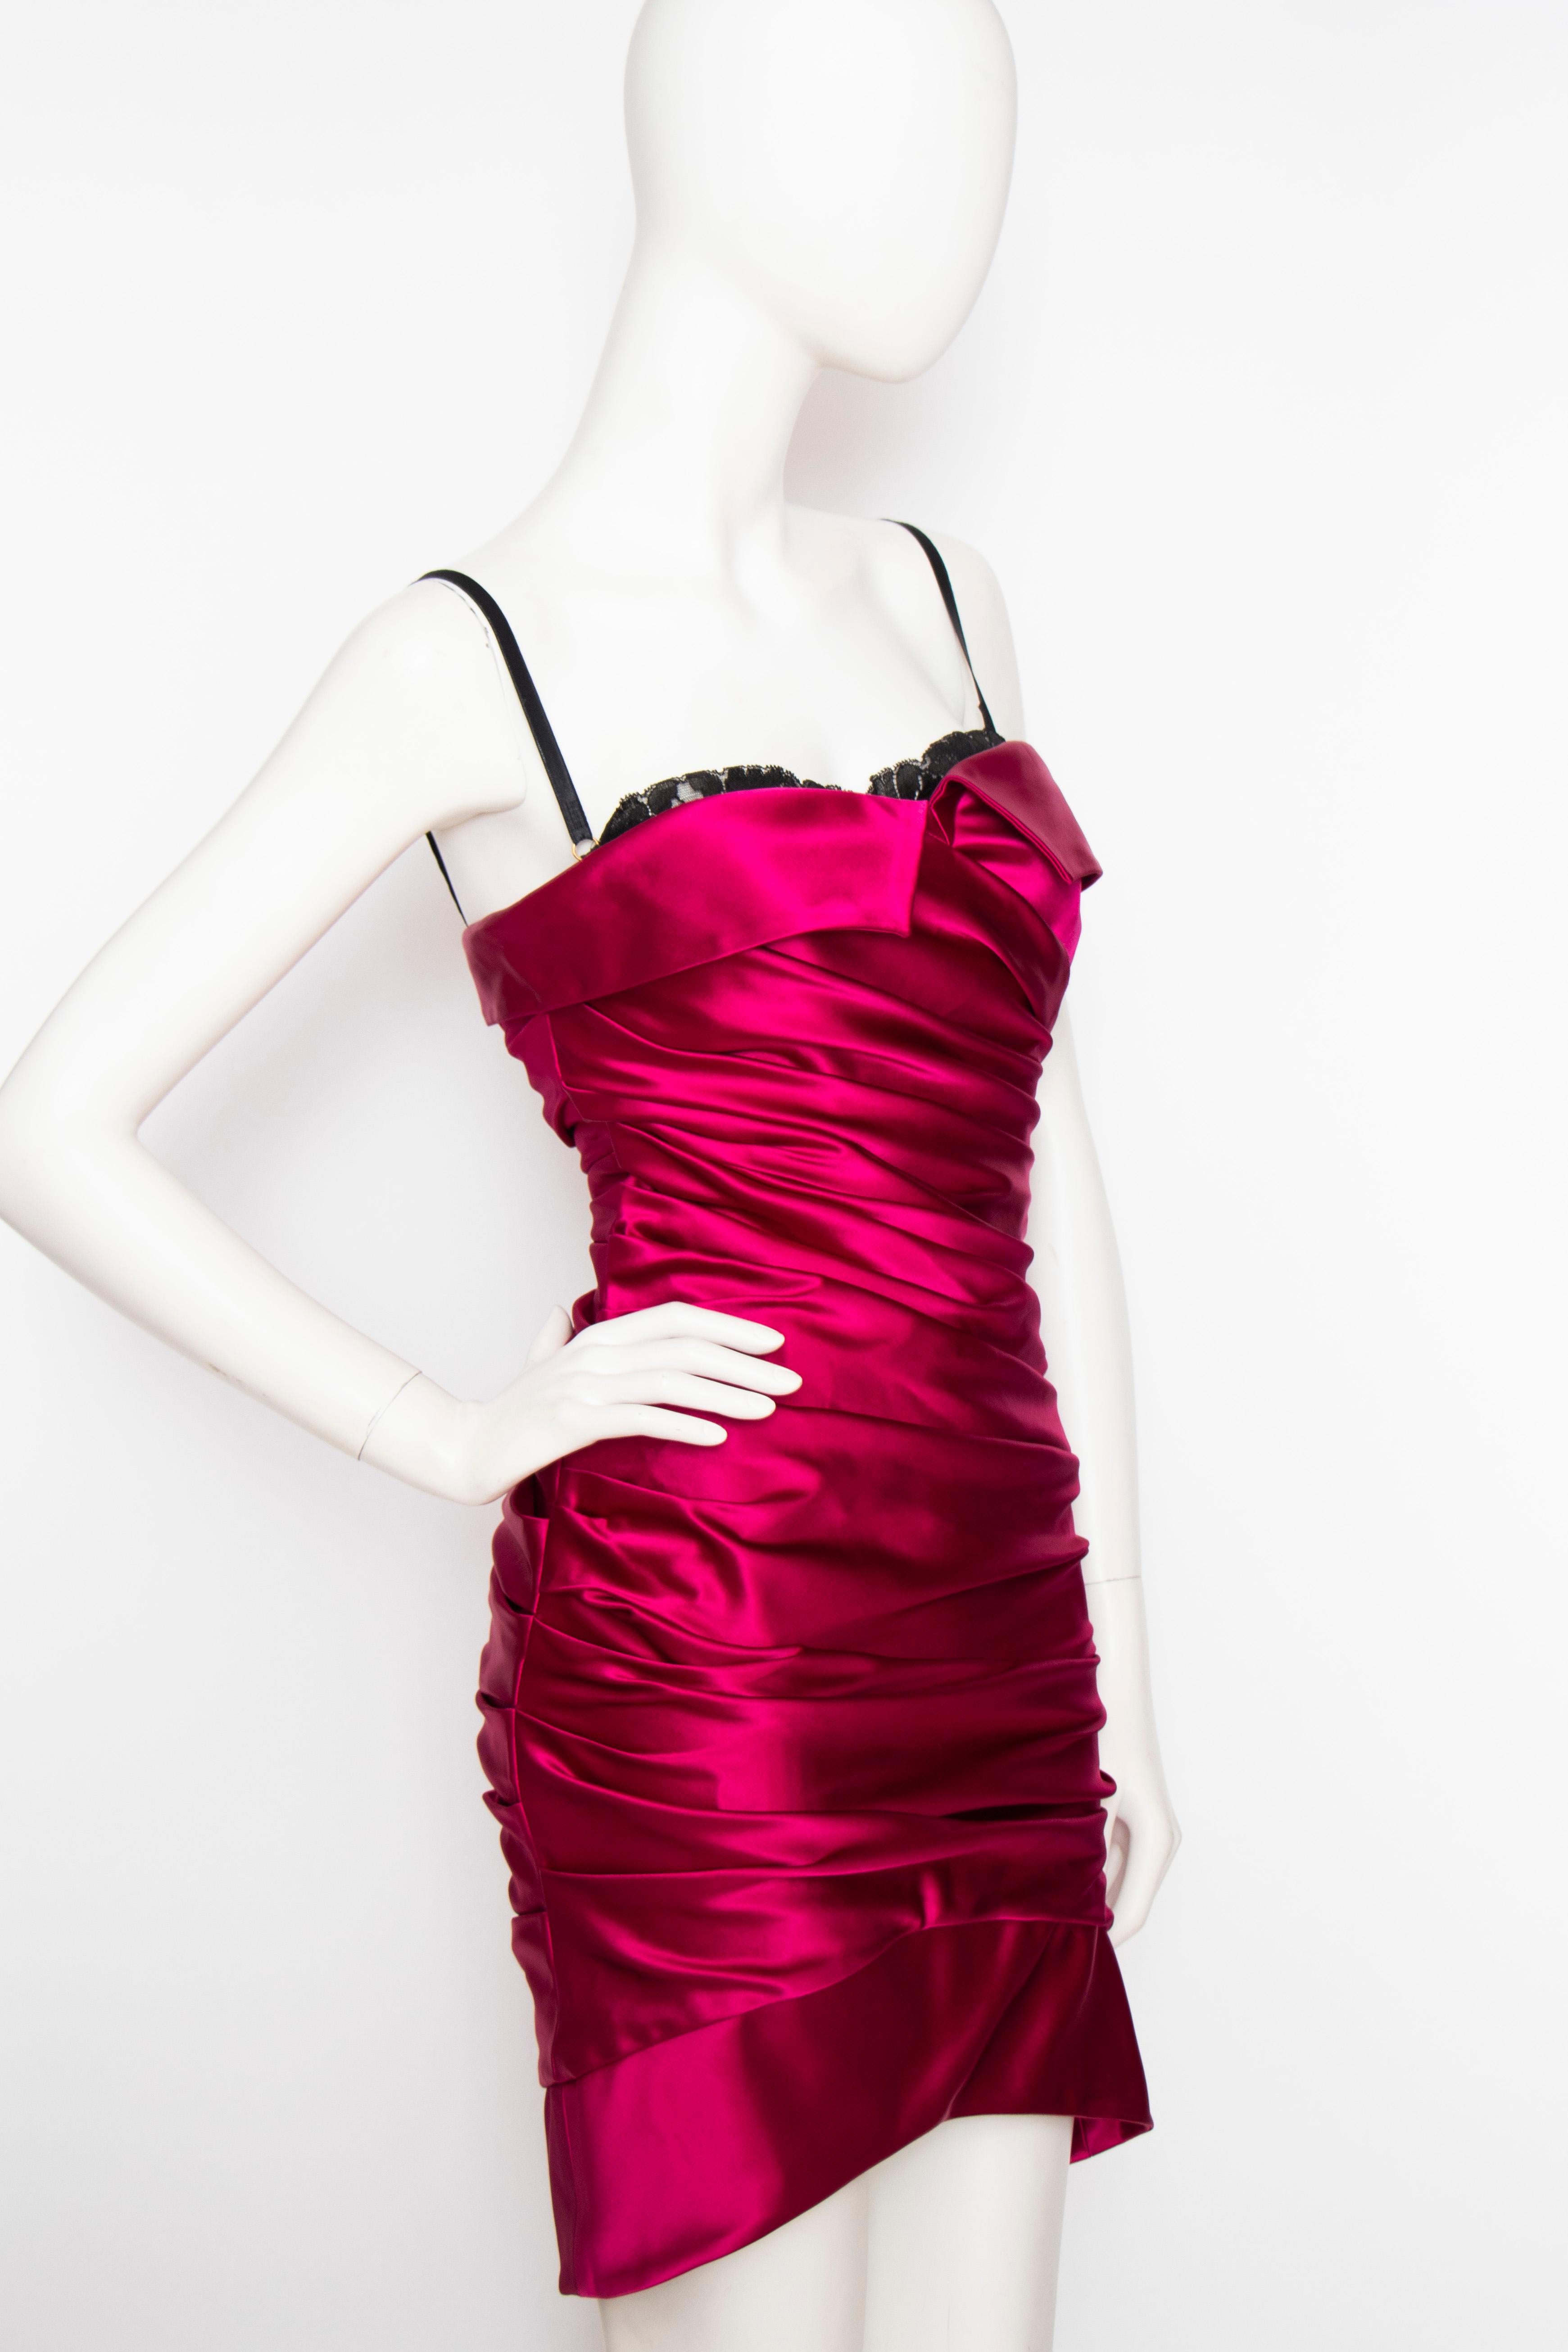 An early 2000s Dolce & Gabbana pink satin cocktail dress with stunning ruching and contrasting black lace bra. 

The size of the dress corresponds to a modern size Small. 